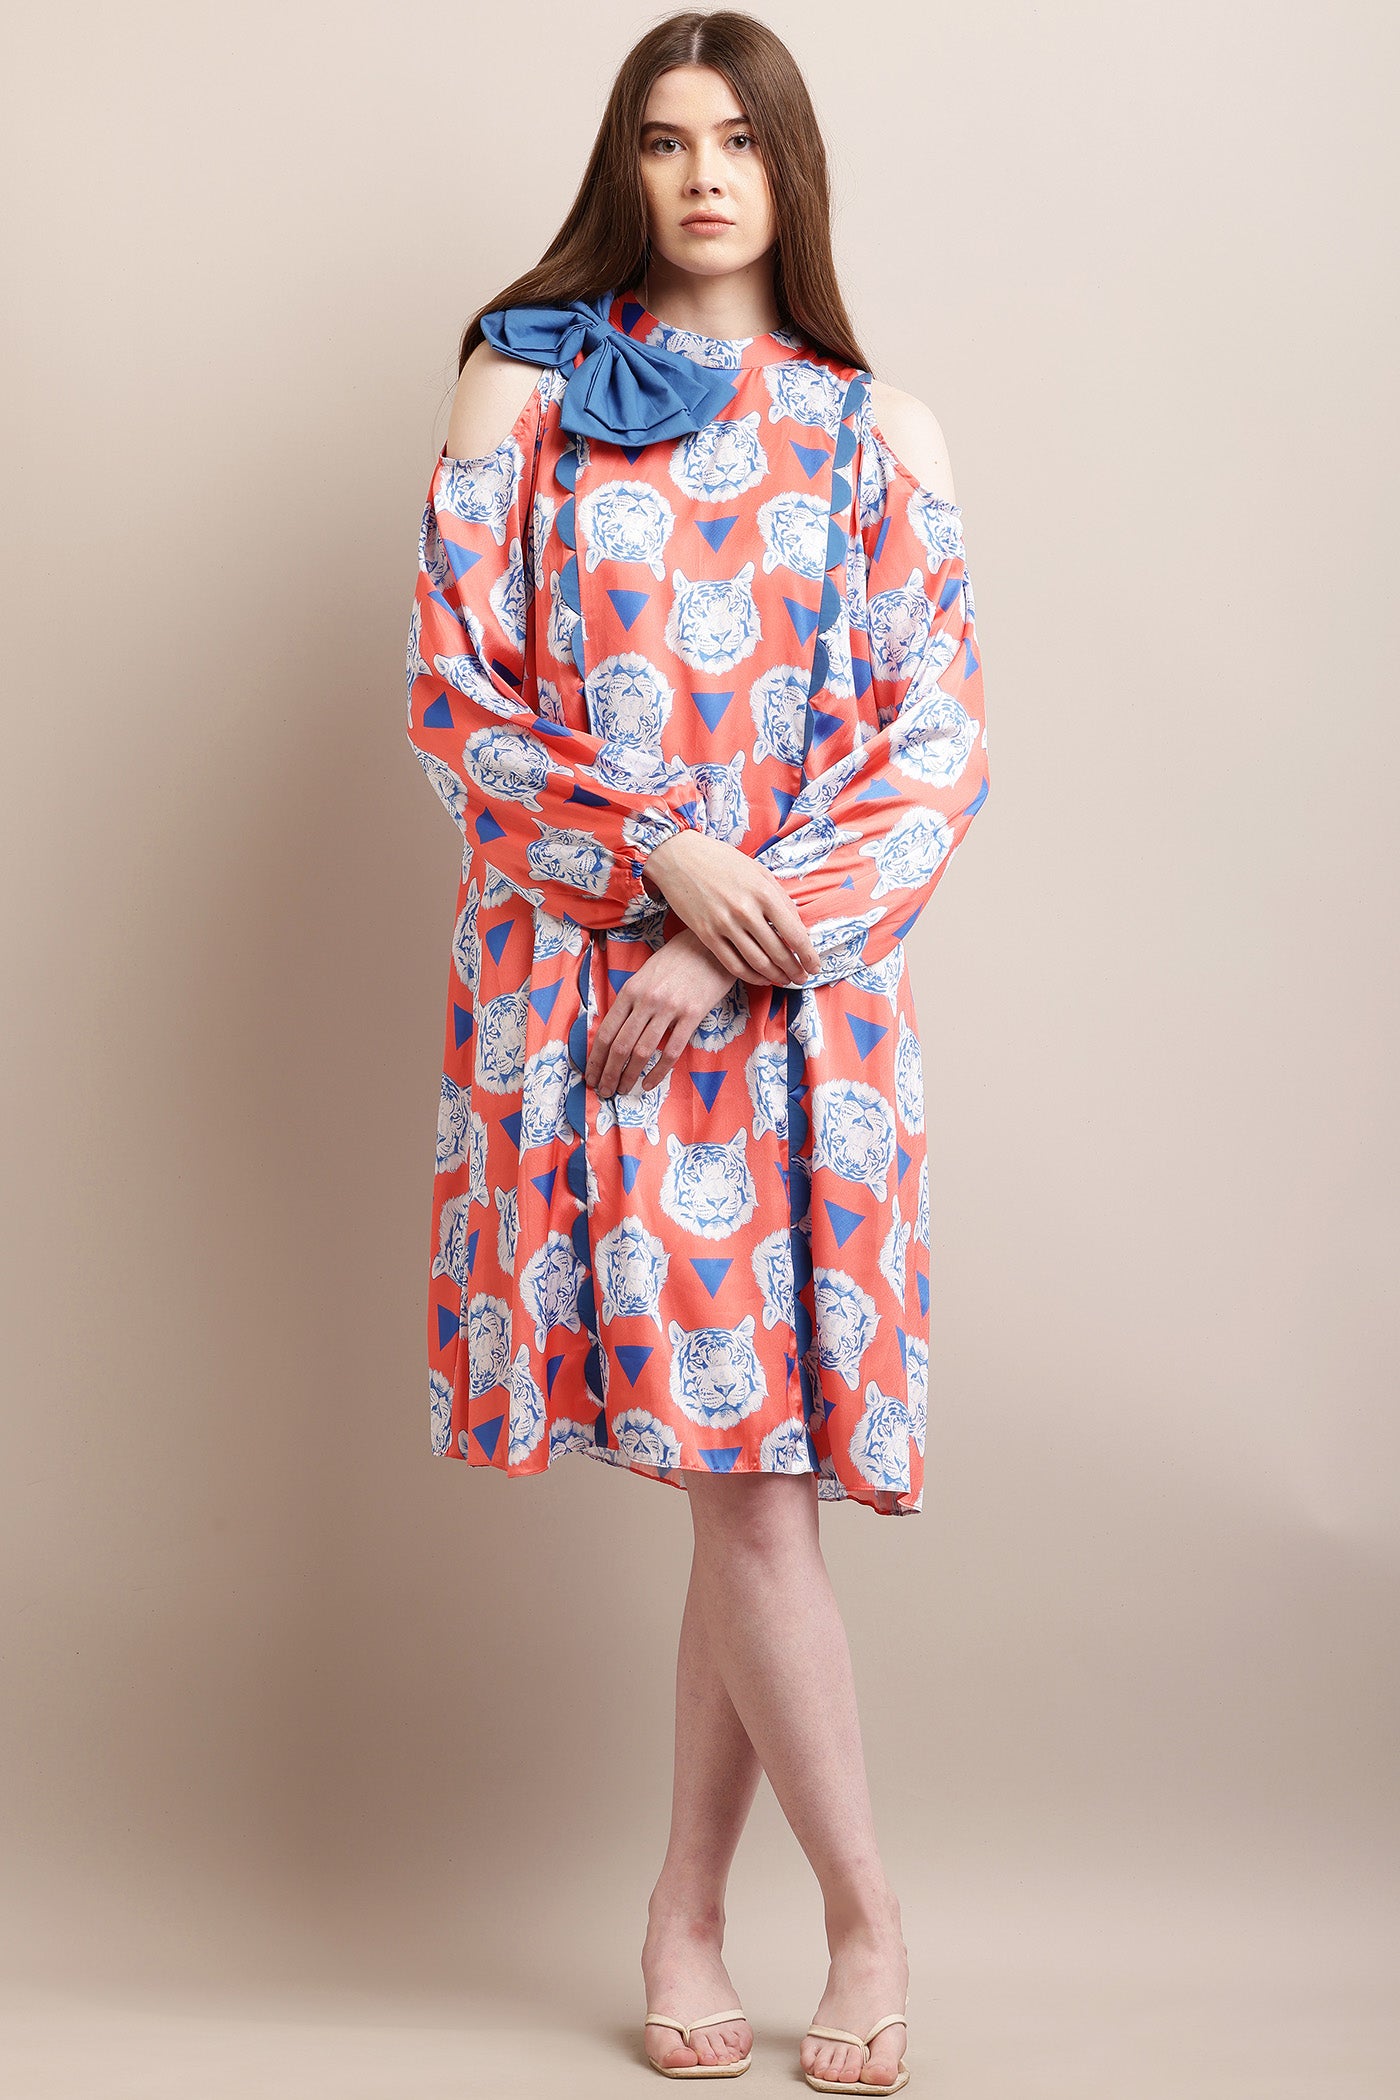 Red & Blue Print Bow & Scallop Dress